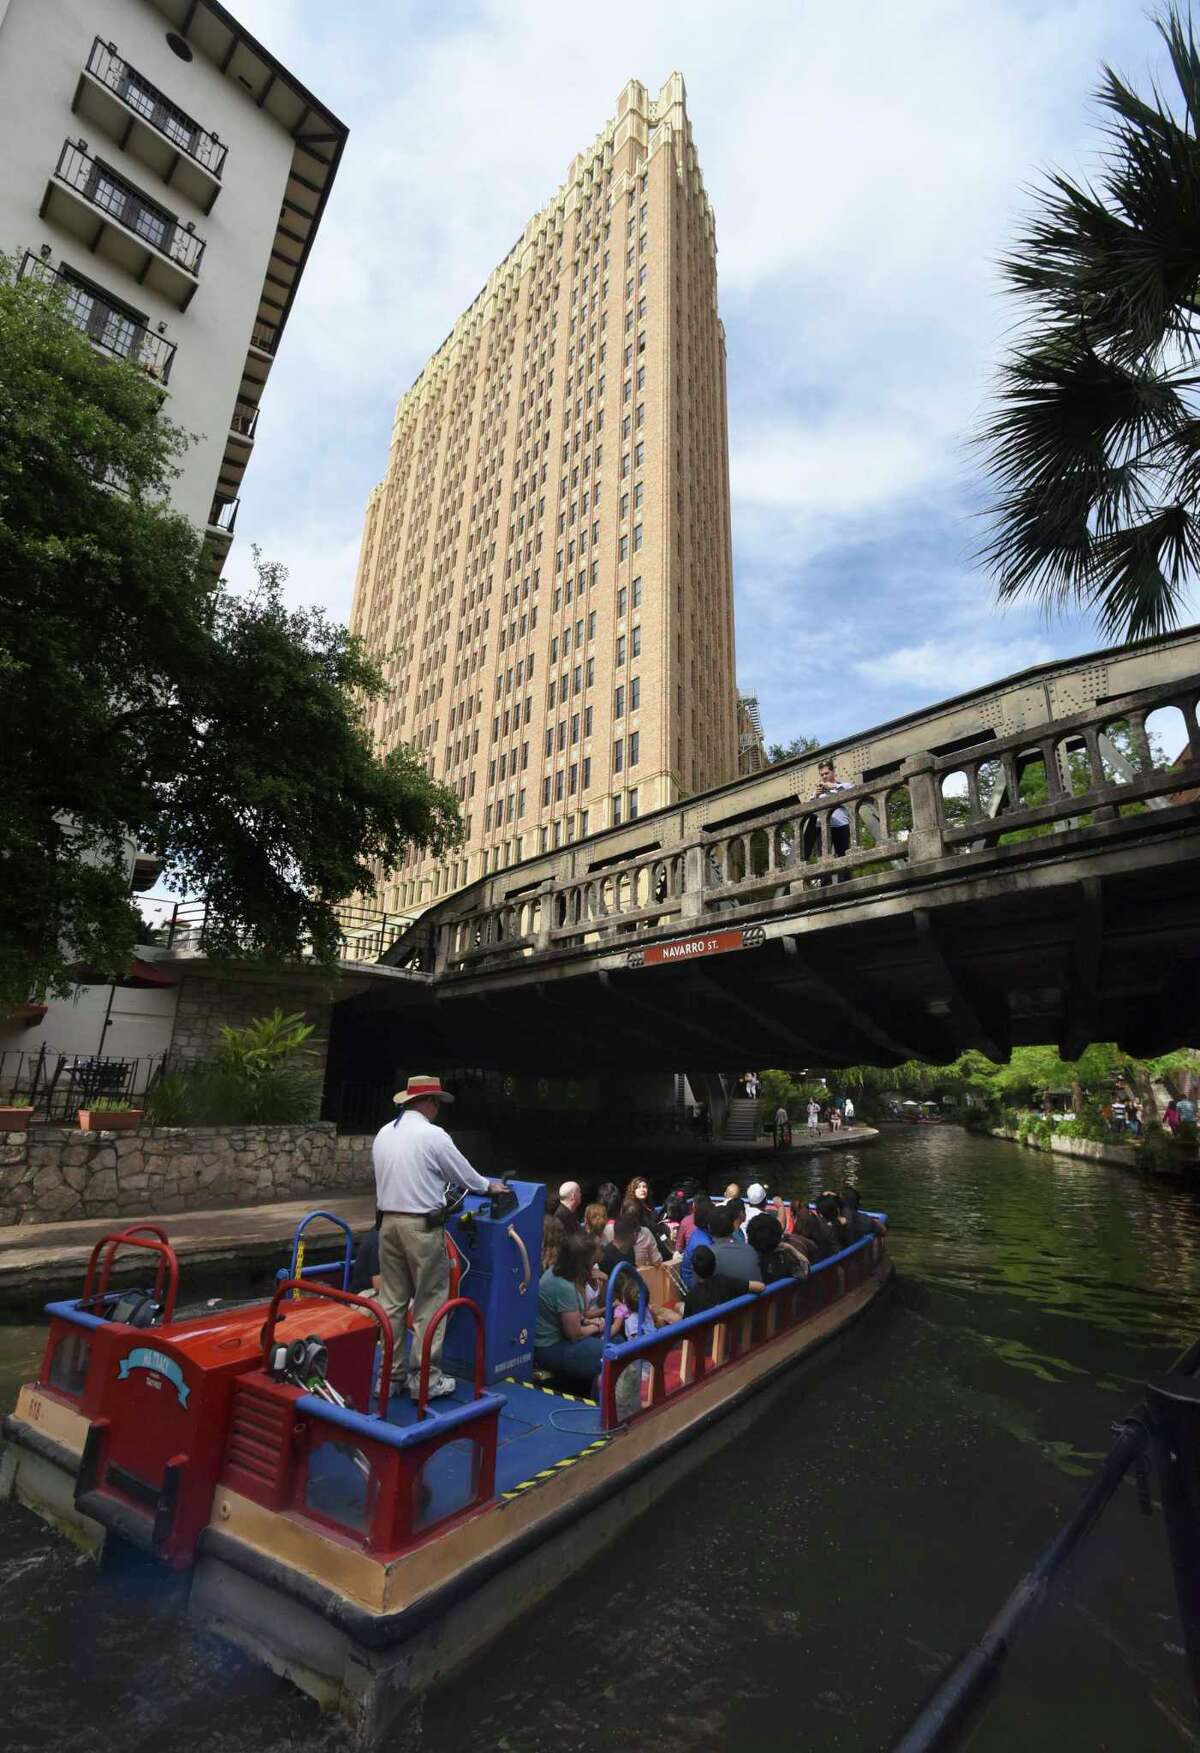 Nix Medical Center looms over a barge on the San Antonio River at the Navarro Street bridge in this 2015 photo.